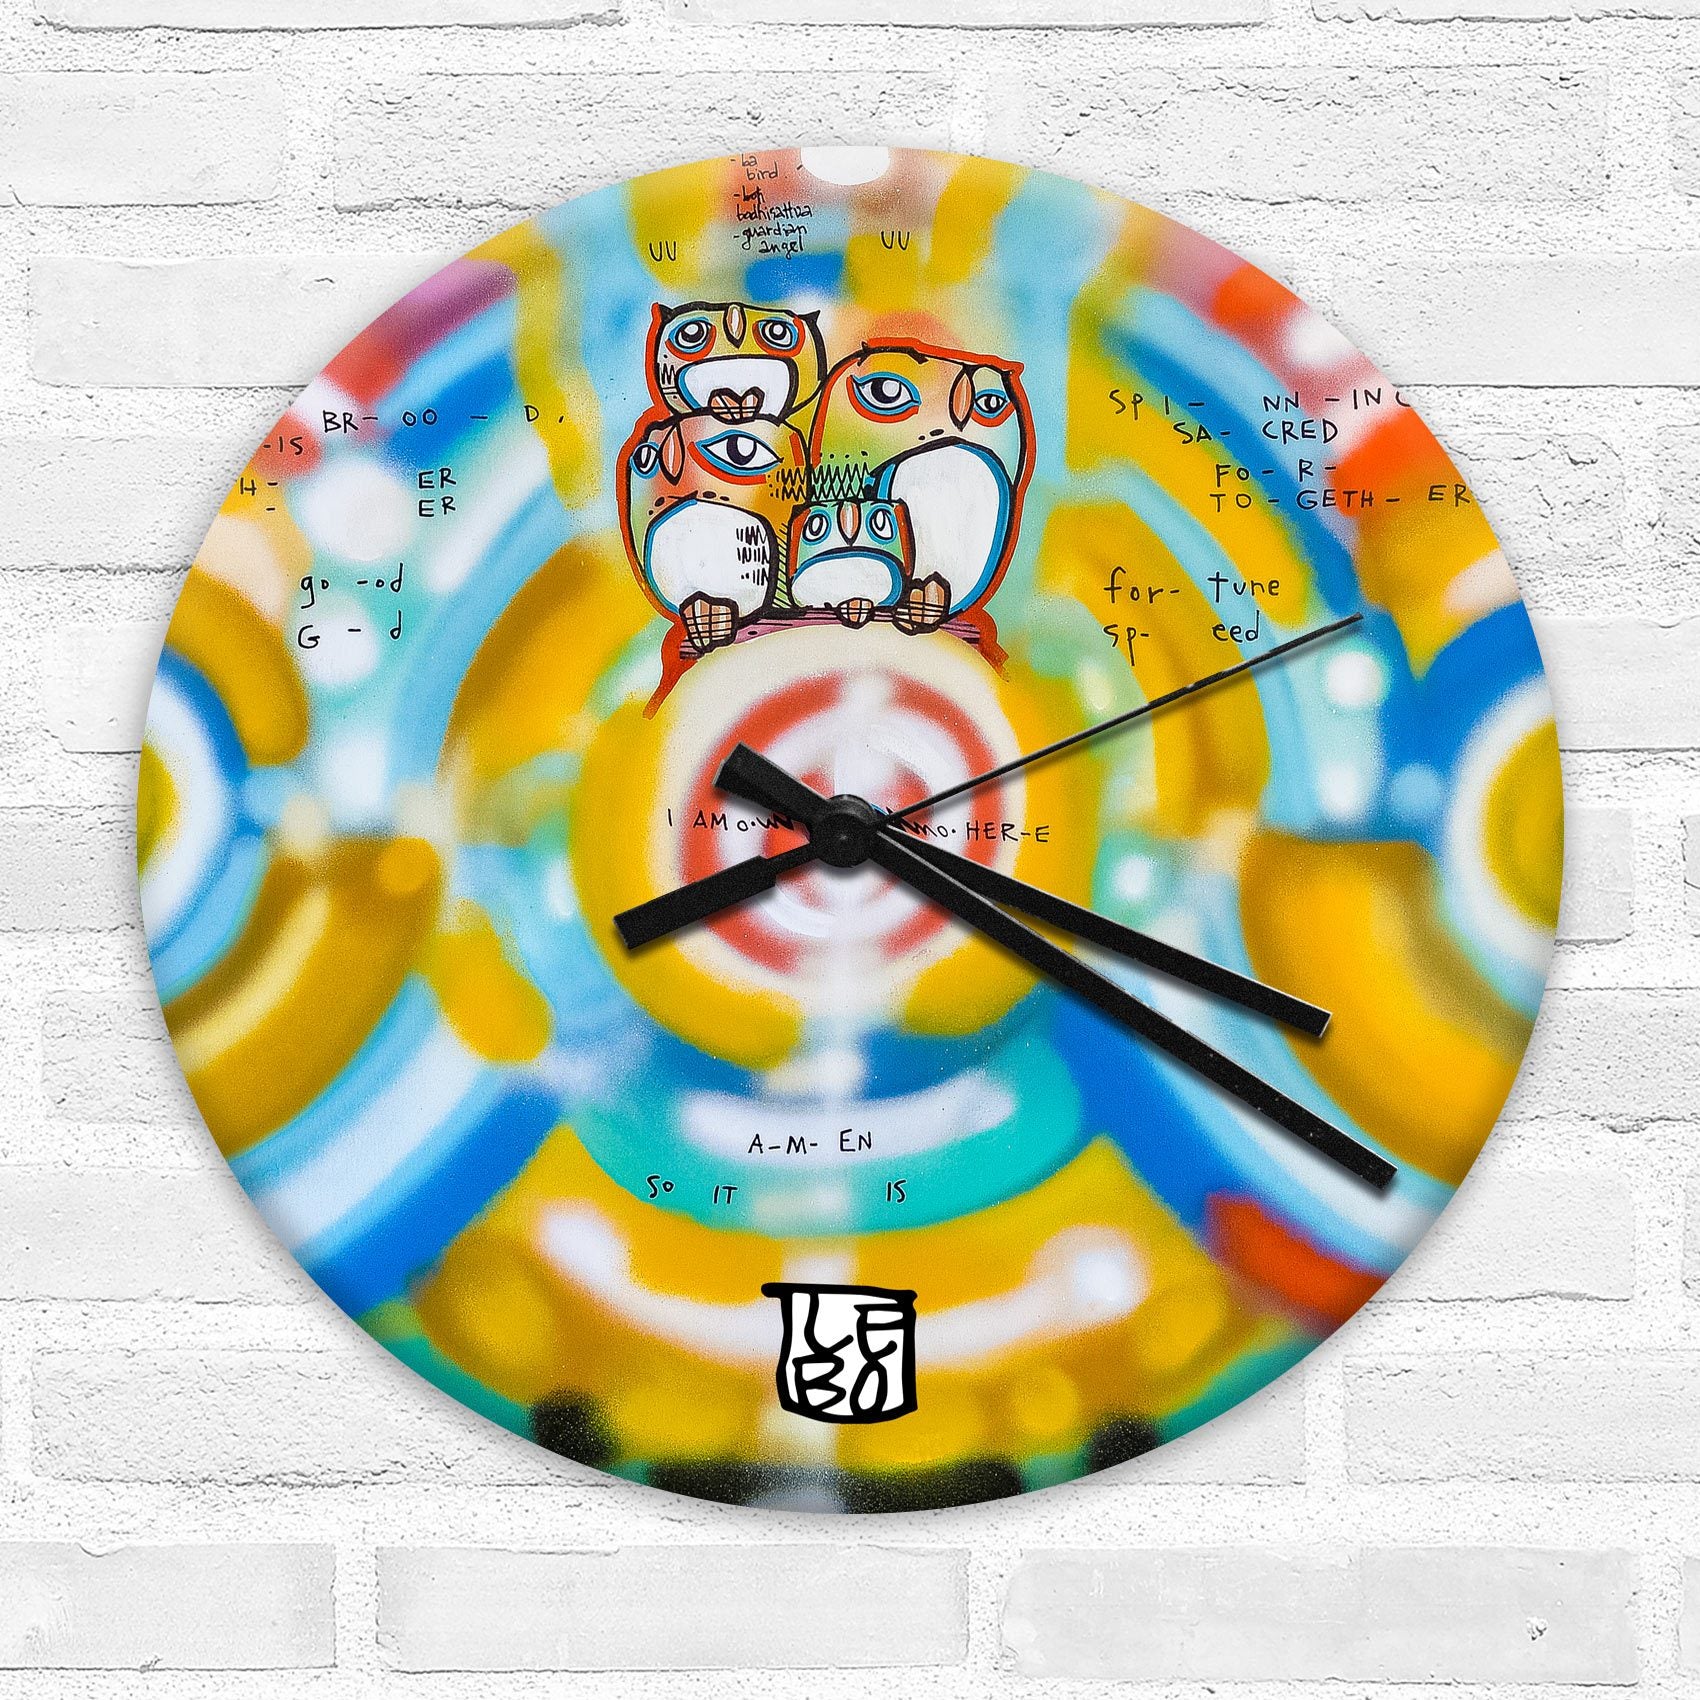 Good Fortune and Godspeed - Limited Edition - Timepieces - shop.leboart.com